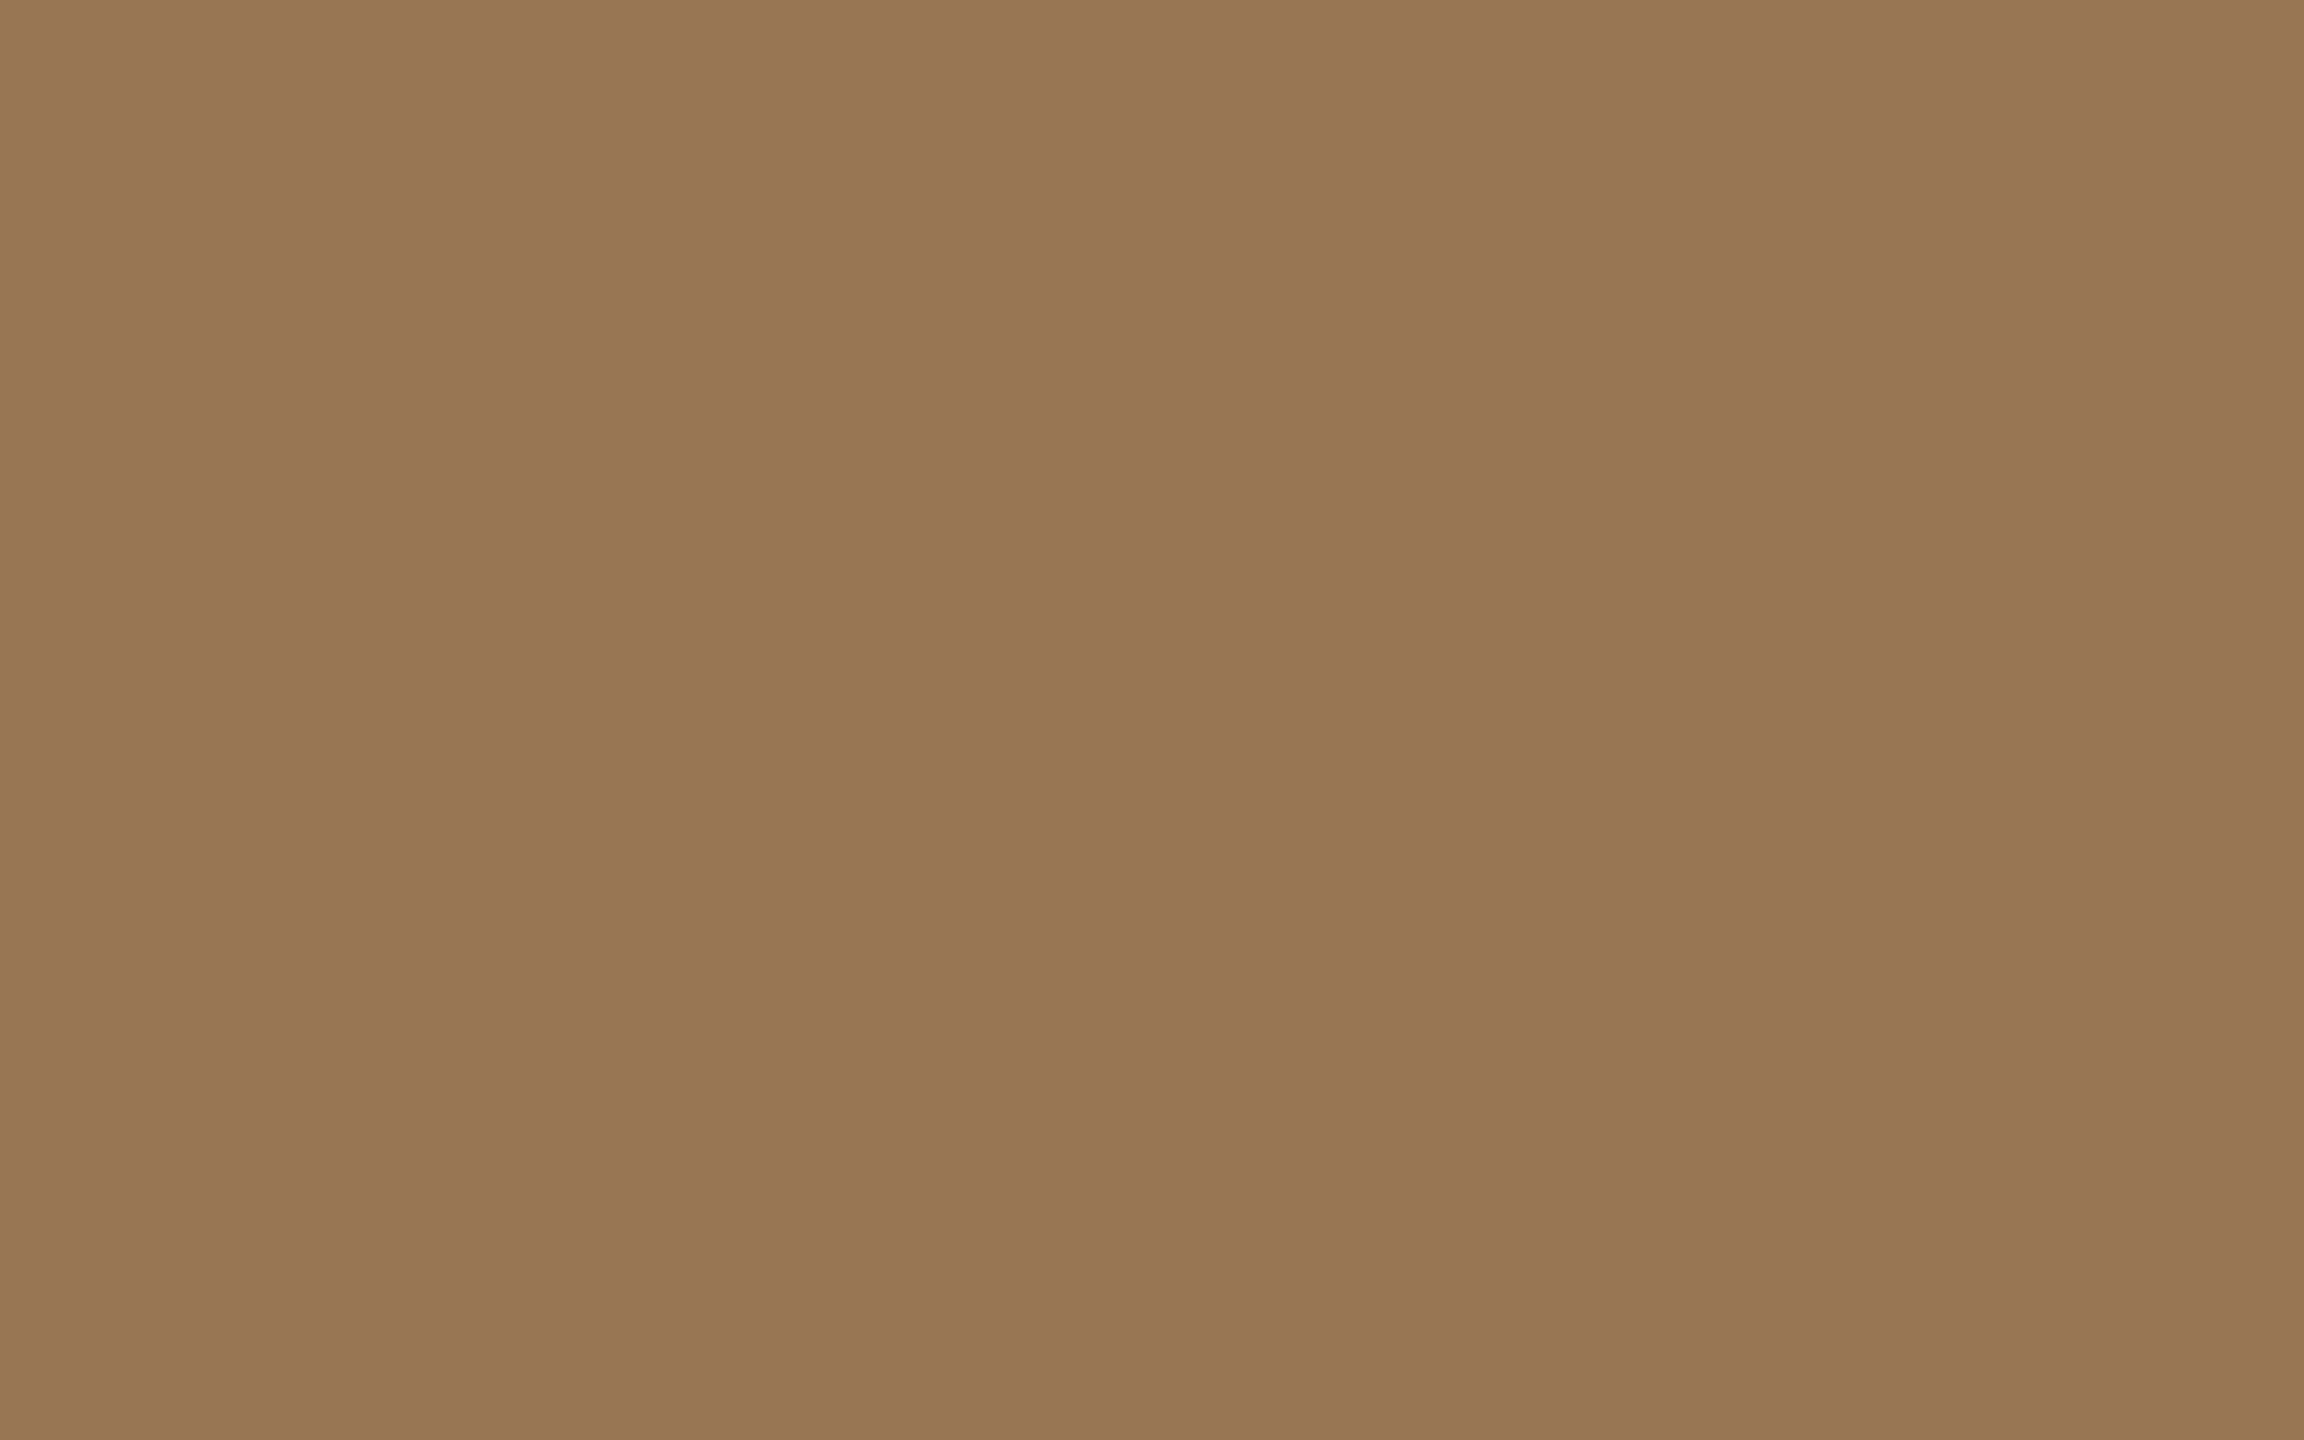 2304x1440 Pale Brown Solid Color Background